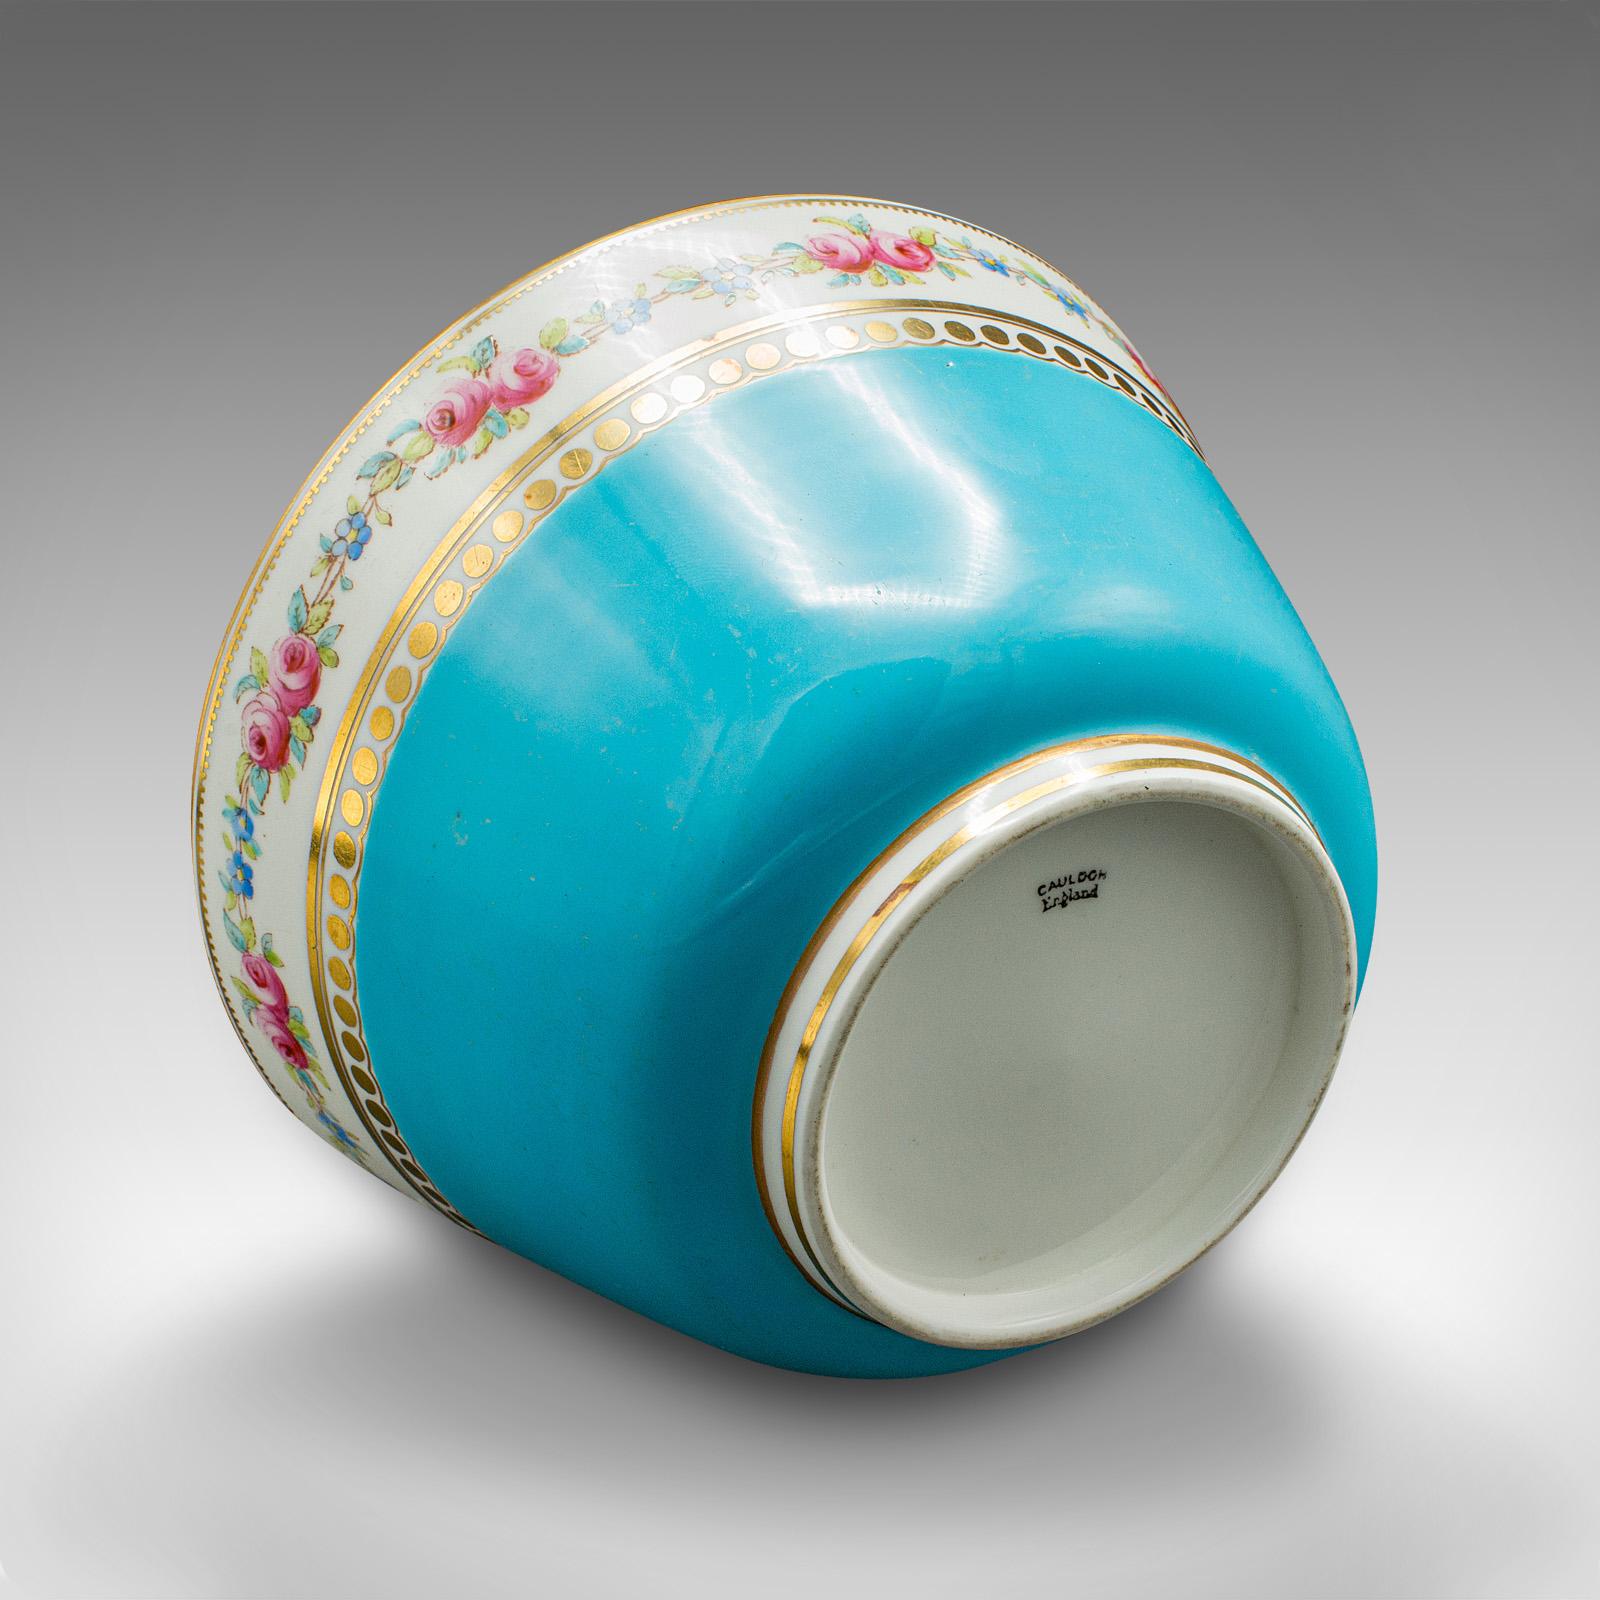 Antique Sugar Bowl, English, Ceramic, Afternoon Tea Dish, Early 20th Century For Sale 2